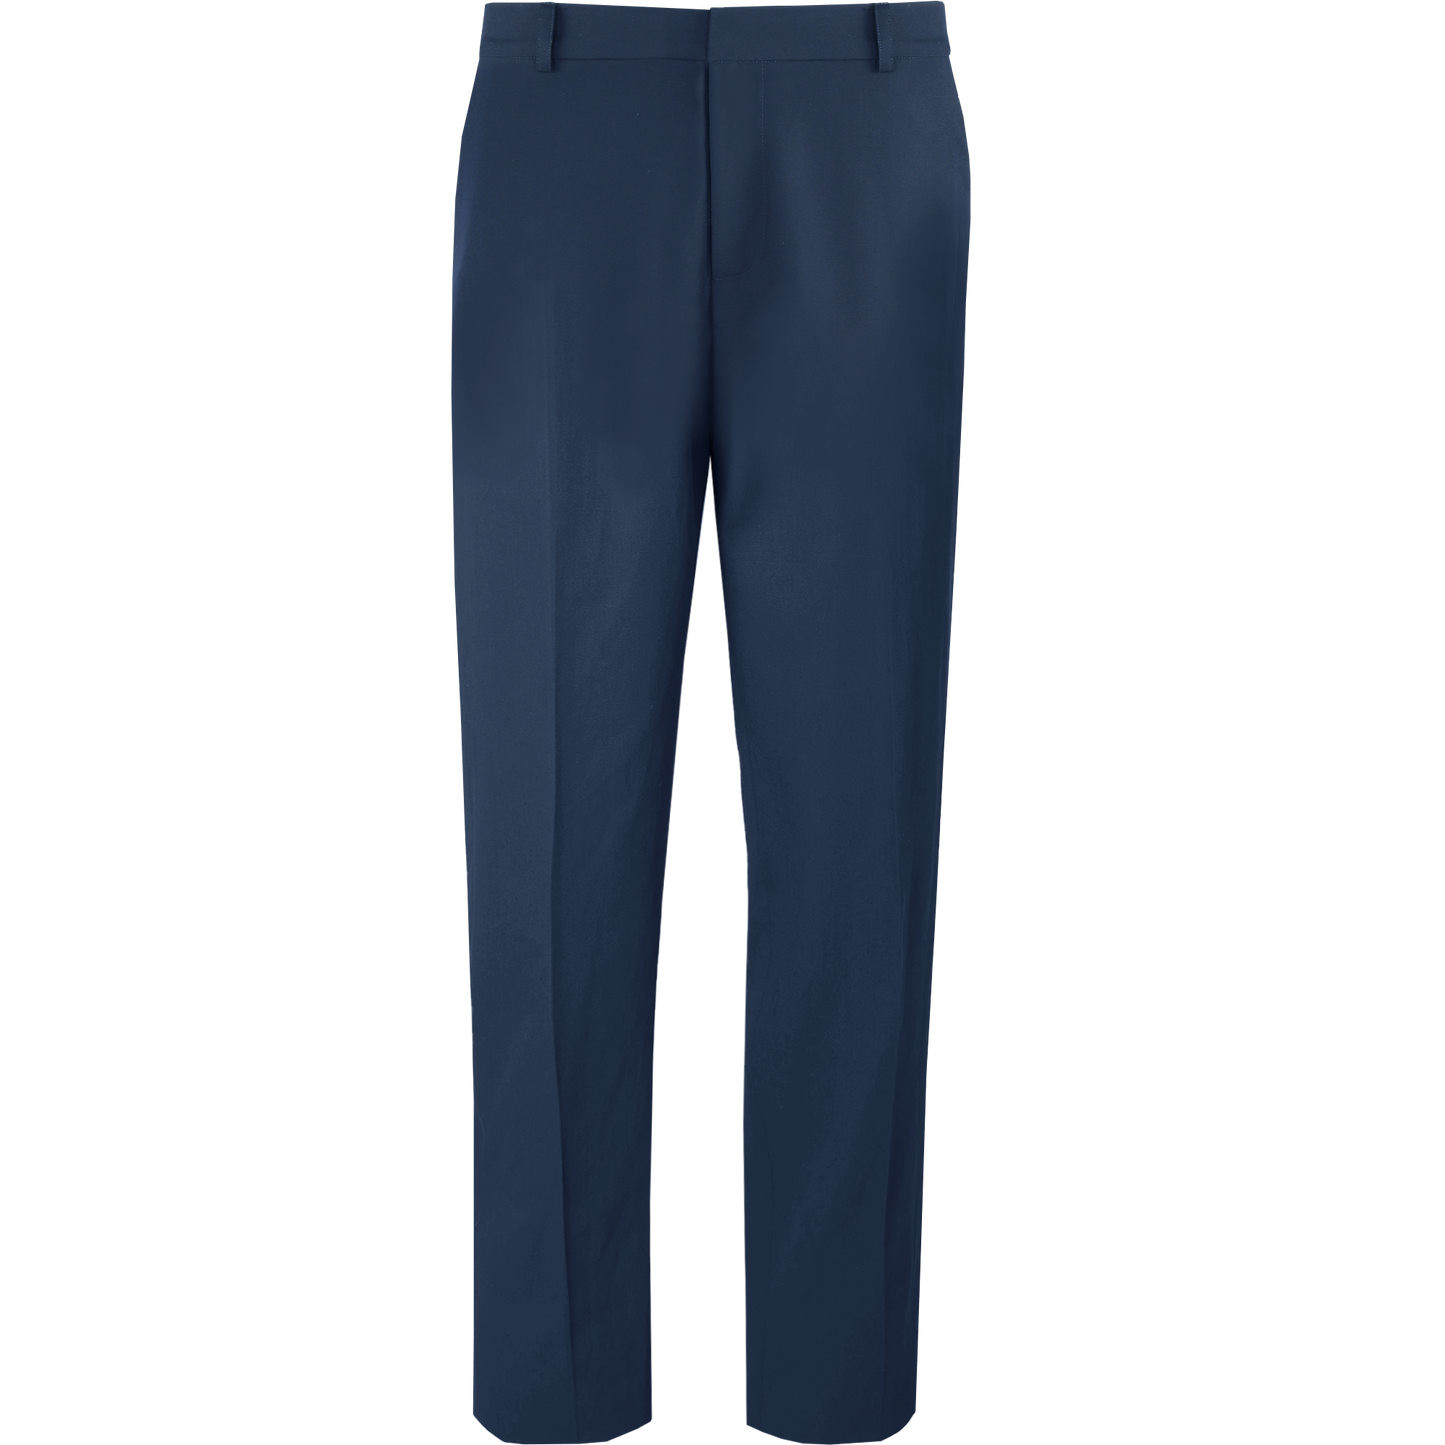 Mens Corporate Uniform Navy Pants by CYC Corporate Label